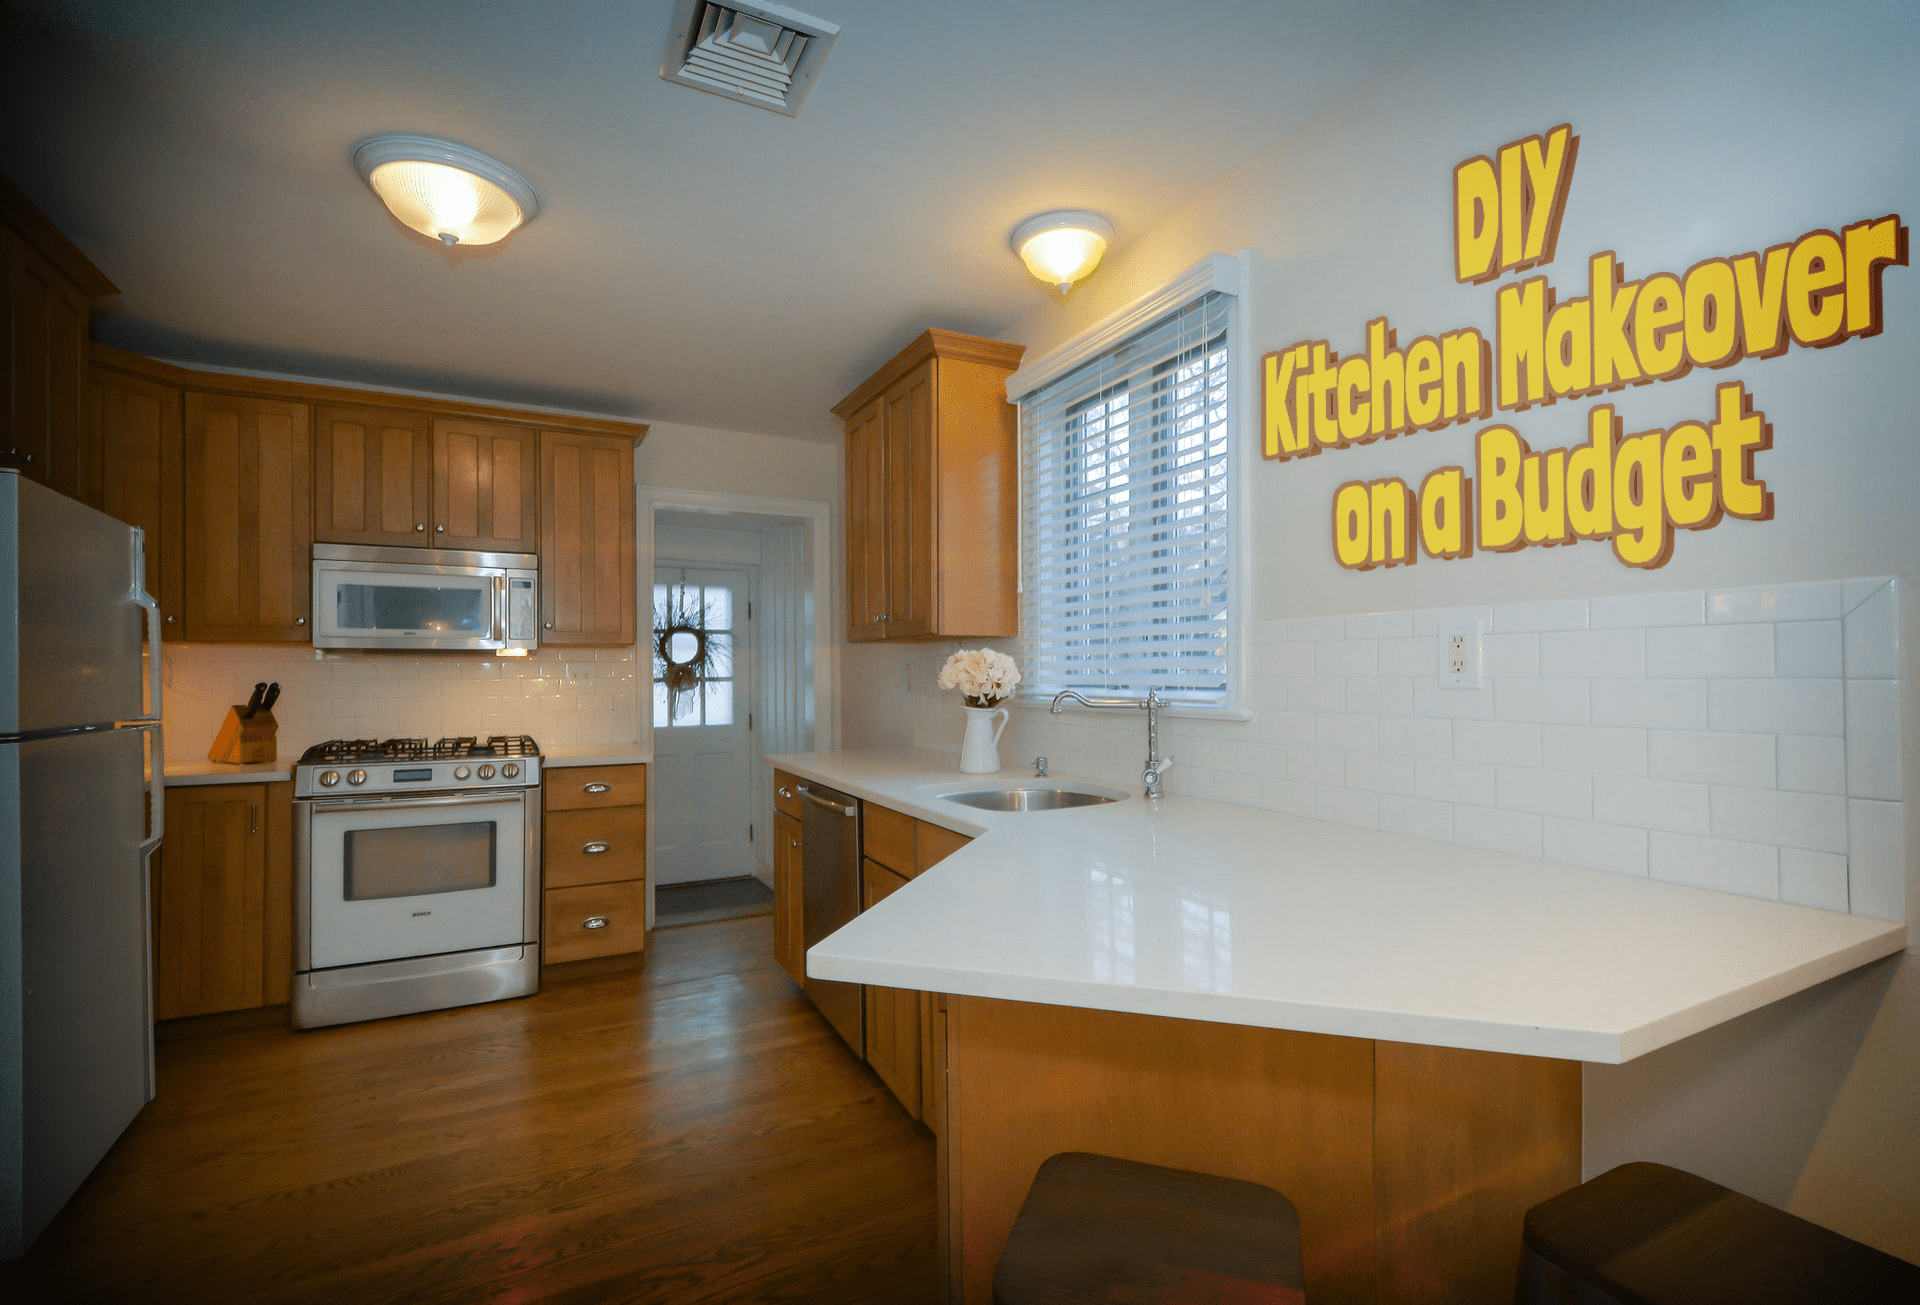 3 Easy Diy Kitchen Makeover Tips On A